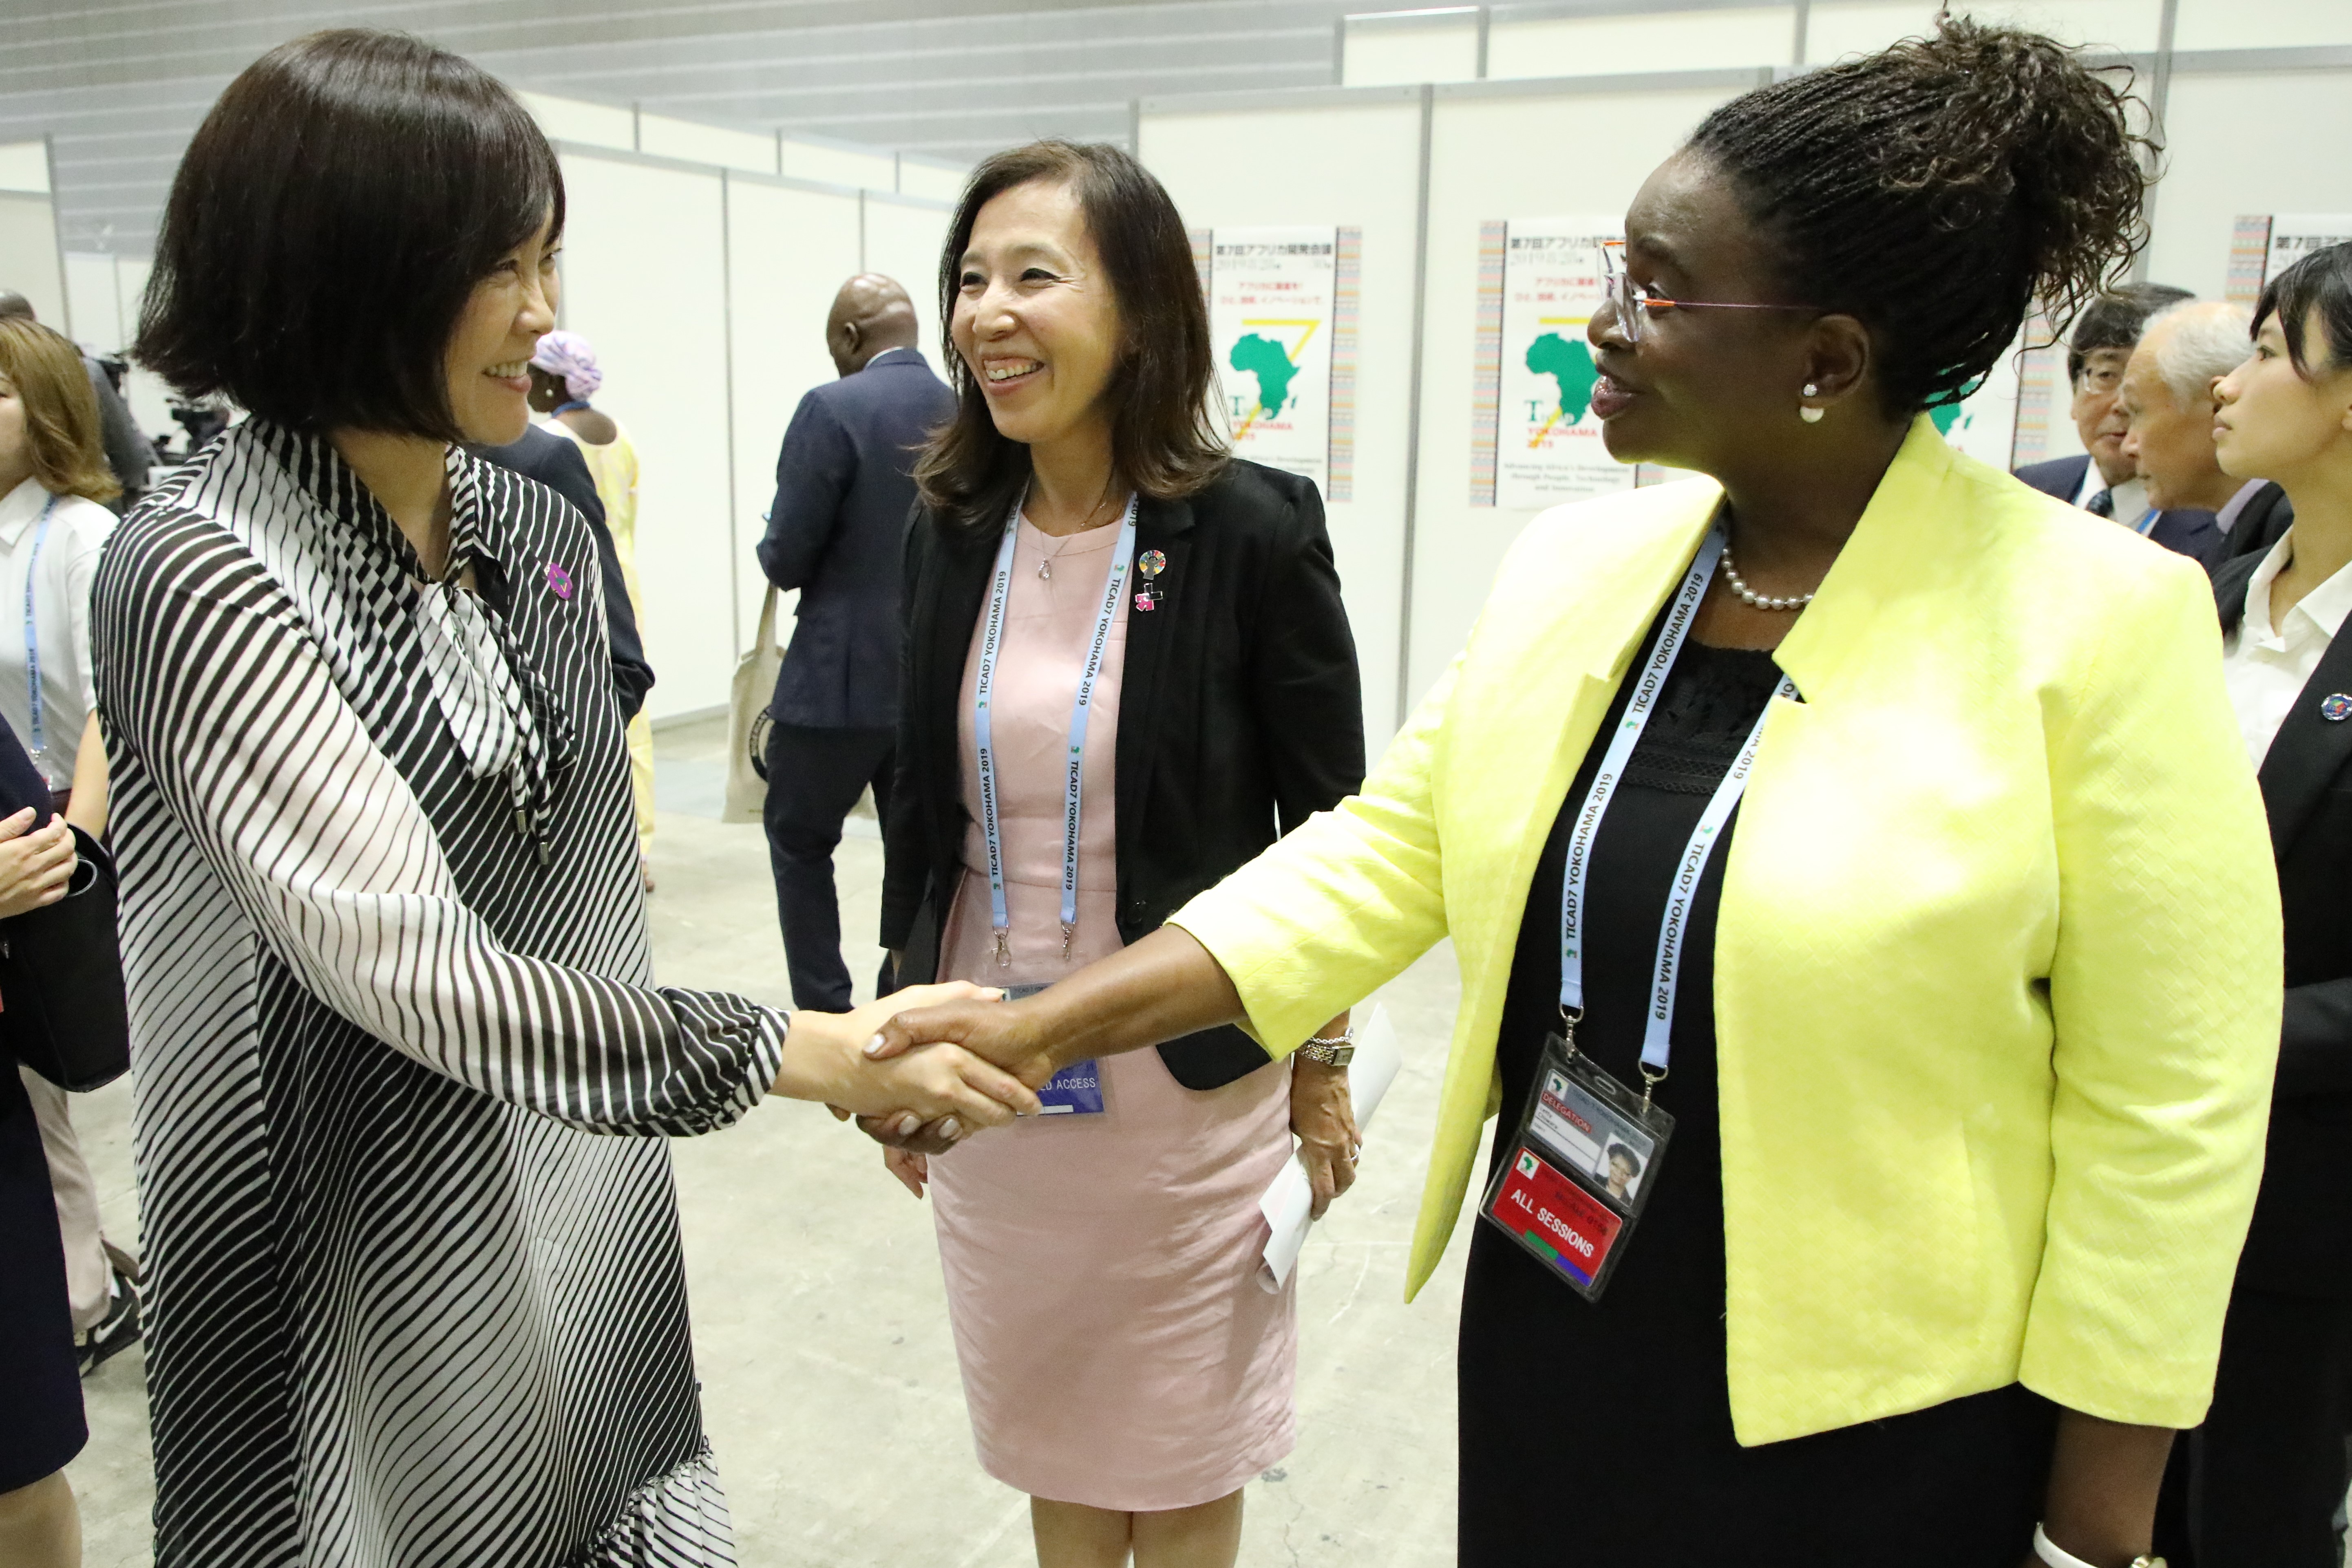 First Lady of Japan visits UN Women's booth at the exhibition hall where she is welcomed by Kae Ishikawa, Director of UN Women Japan Liaison Office, and Letty Chiwara, UN Women Representative to Ethiopia, Africa Union and UNECA.